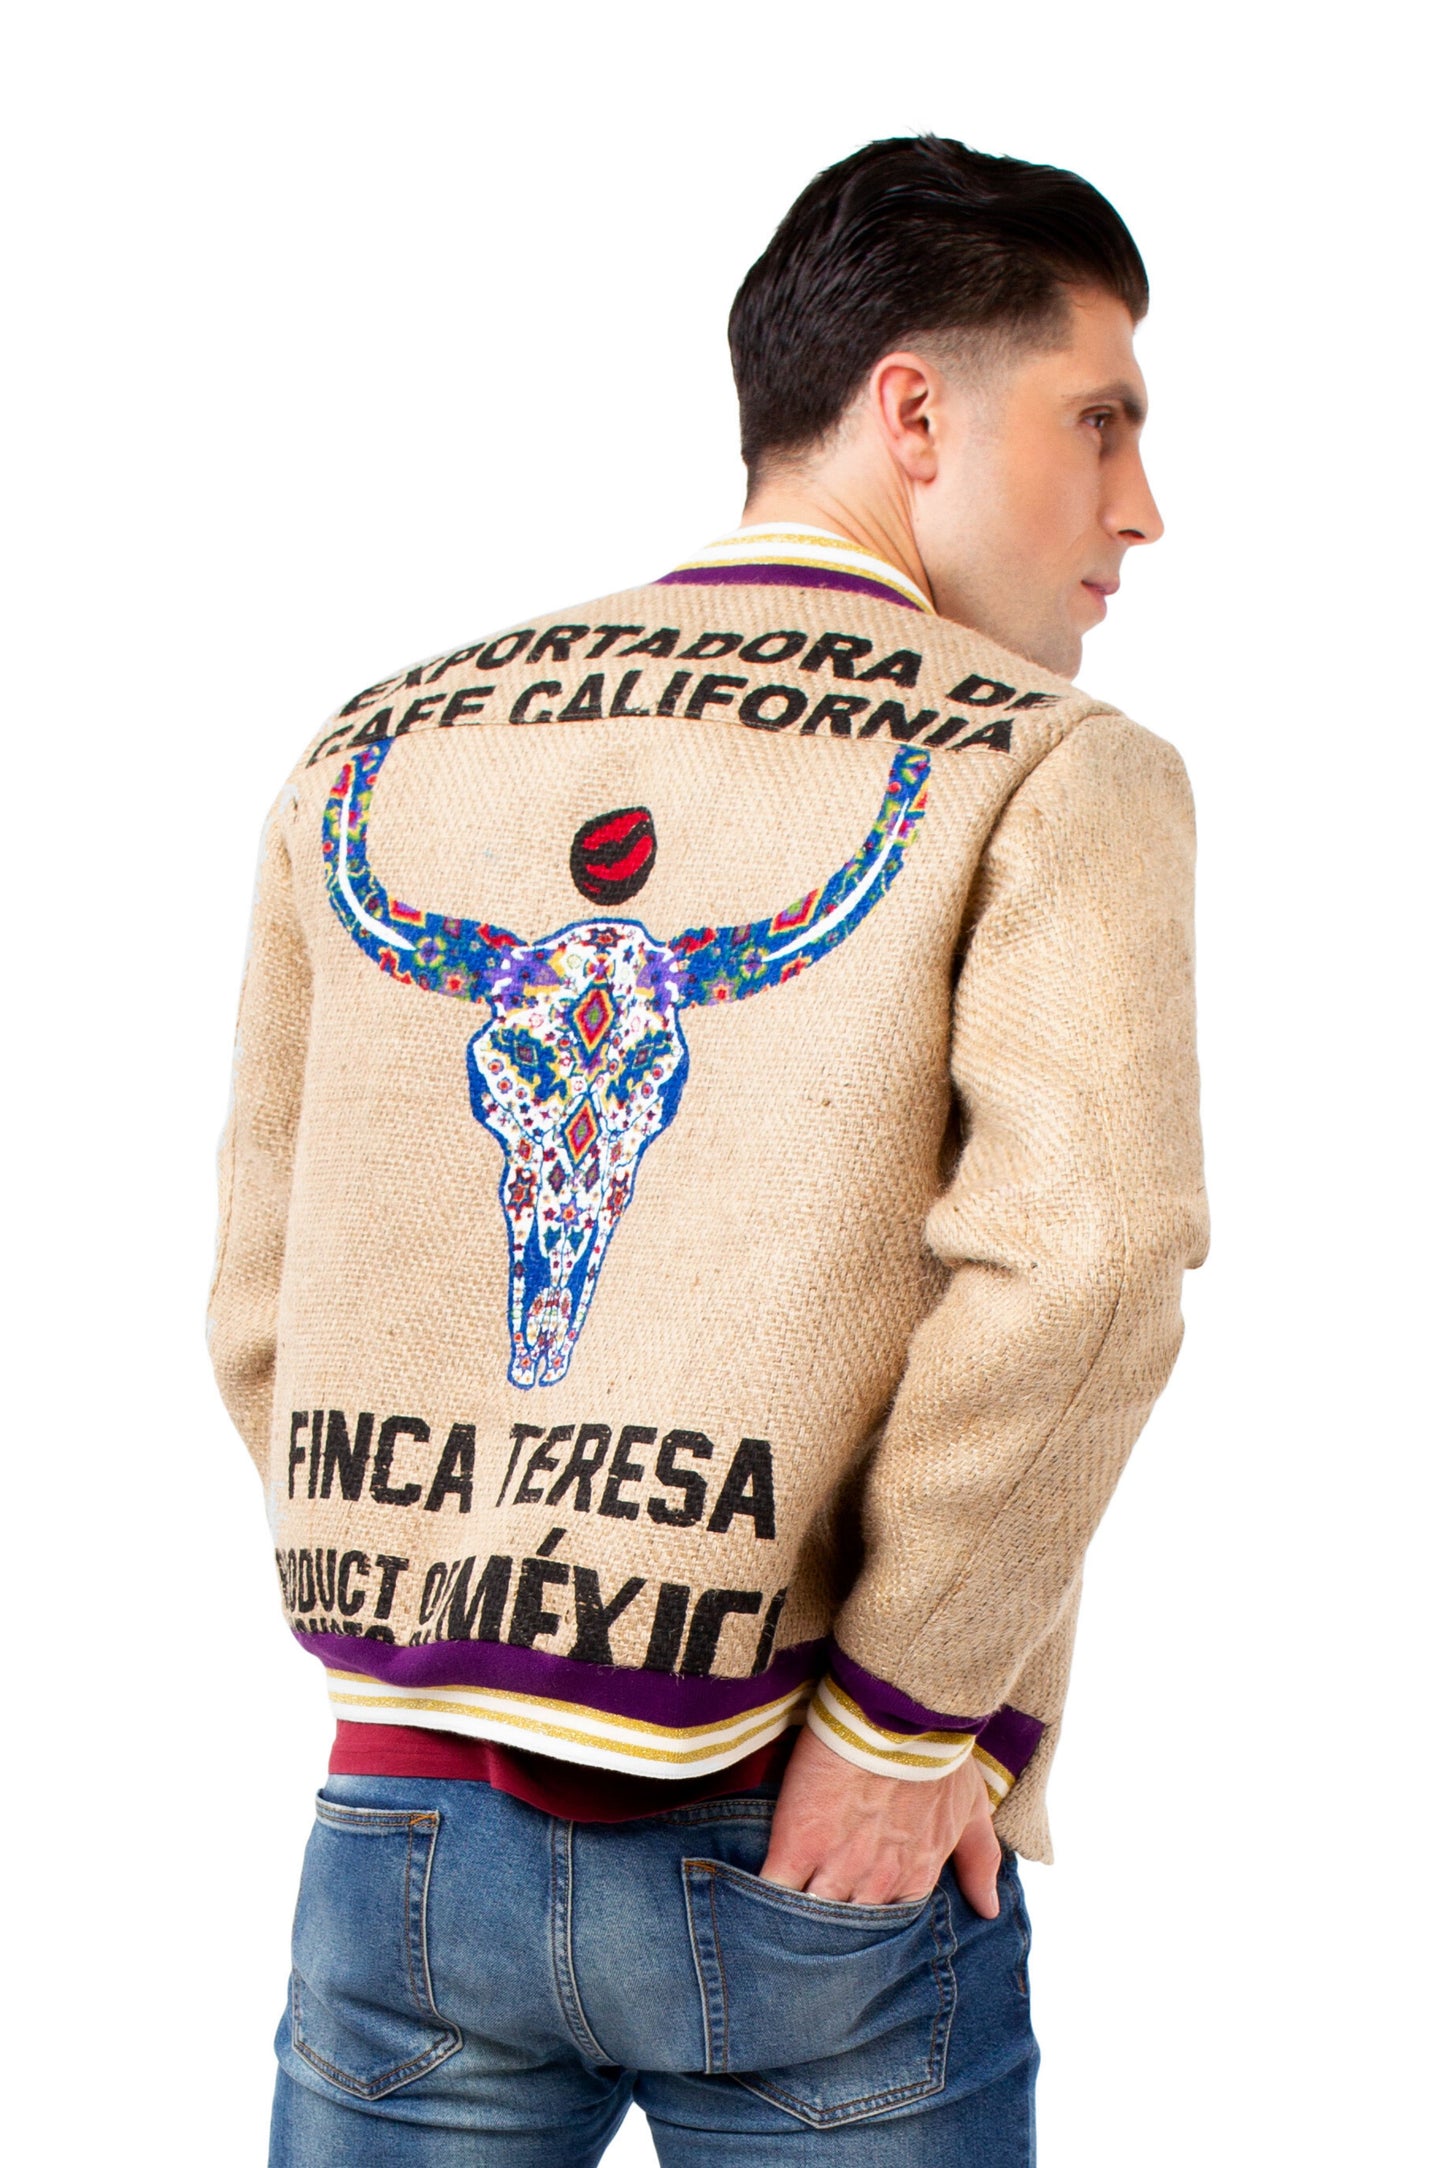 Impressive eco-friendly bomber jacket made of upcycled Mexican coffee sacks with a catchy BULL HEAD print